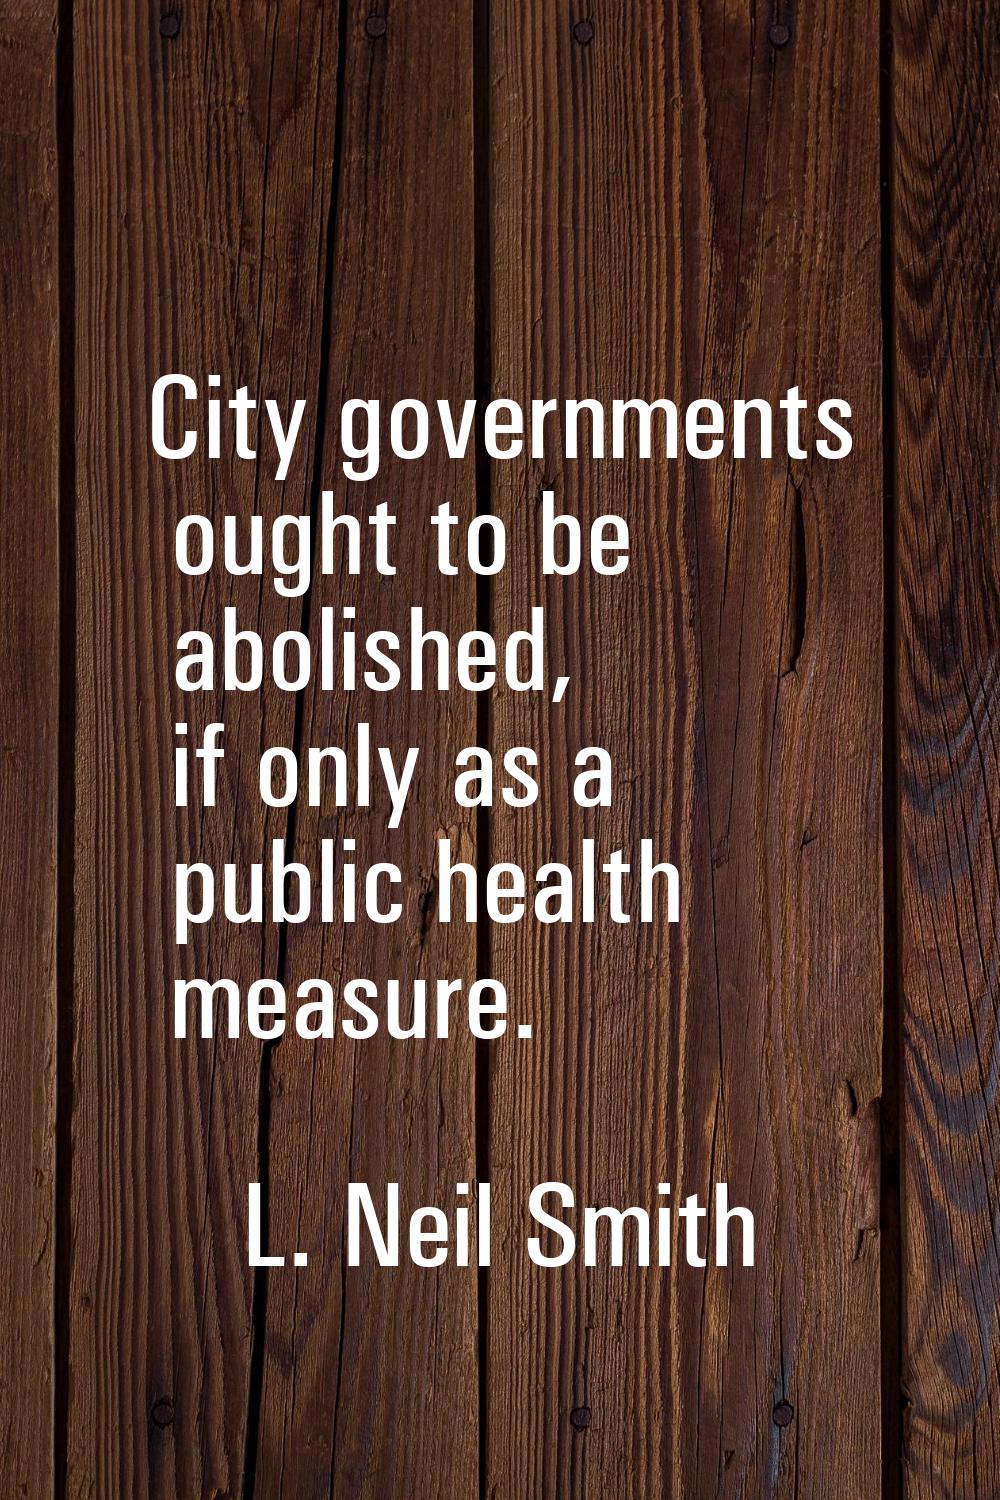 City governments ought to be abolished, if only as a public health measure.